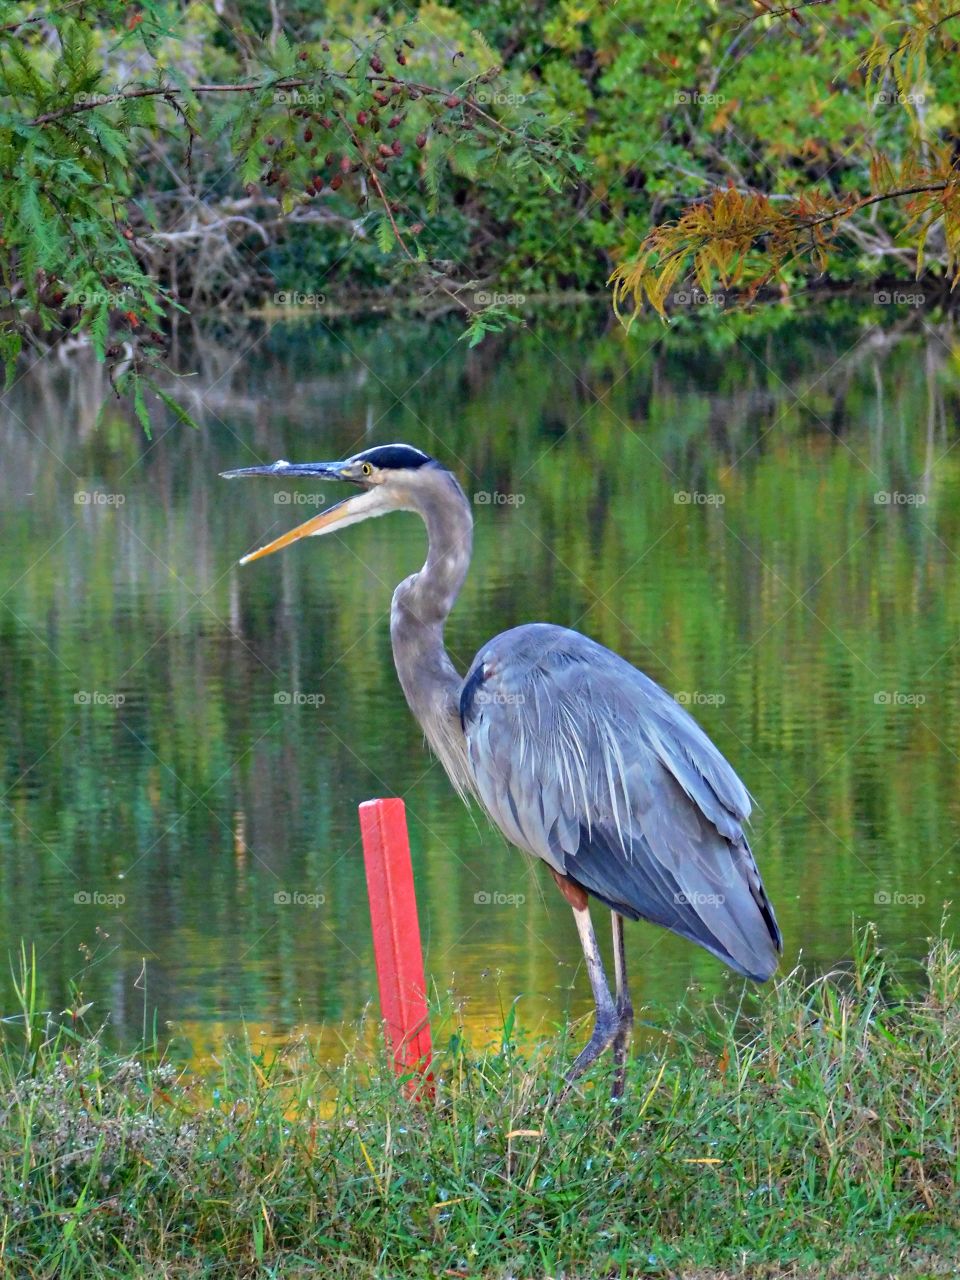 The glorious Mother Nature - Great Blue Heron